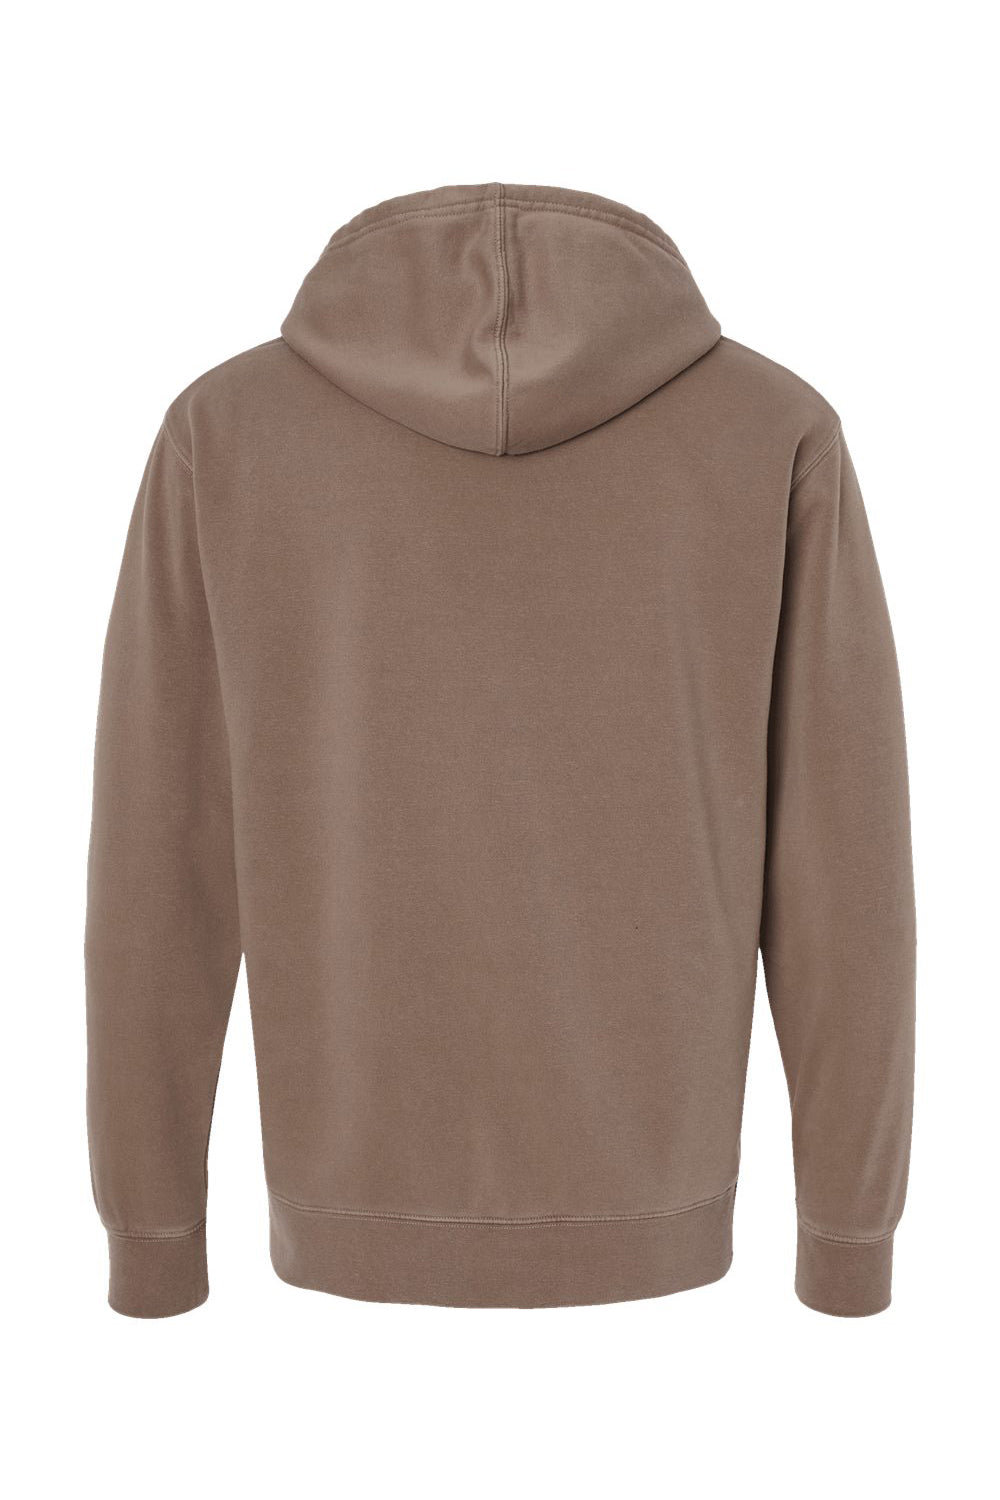 Independent Trading Co. PRM4500 Mens Pigment Dyed Hooded Sweatshirt Hoodie Clay Brown Flat Back